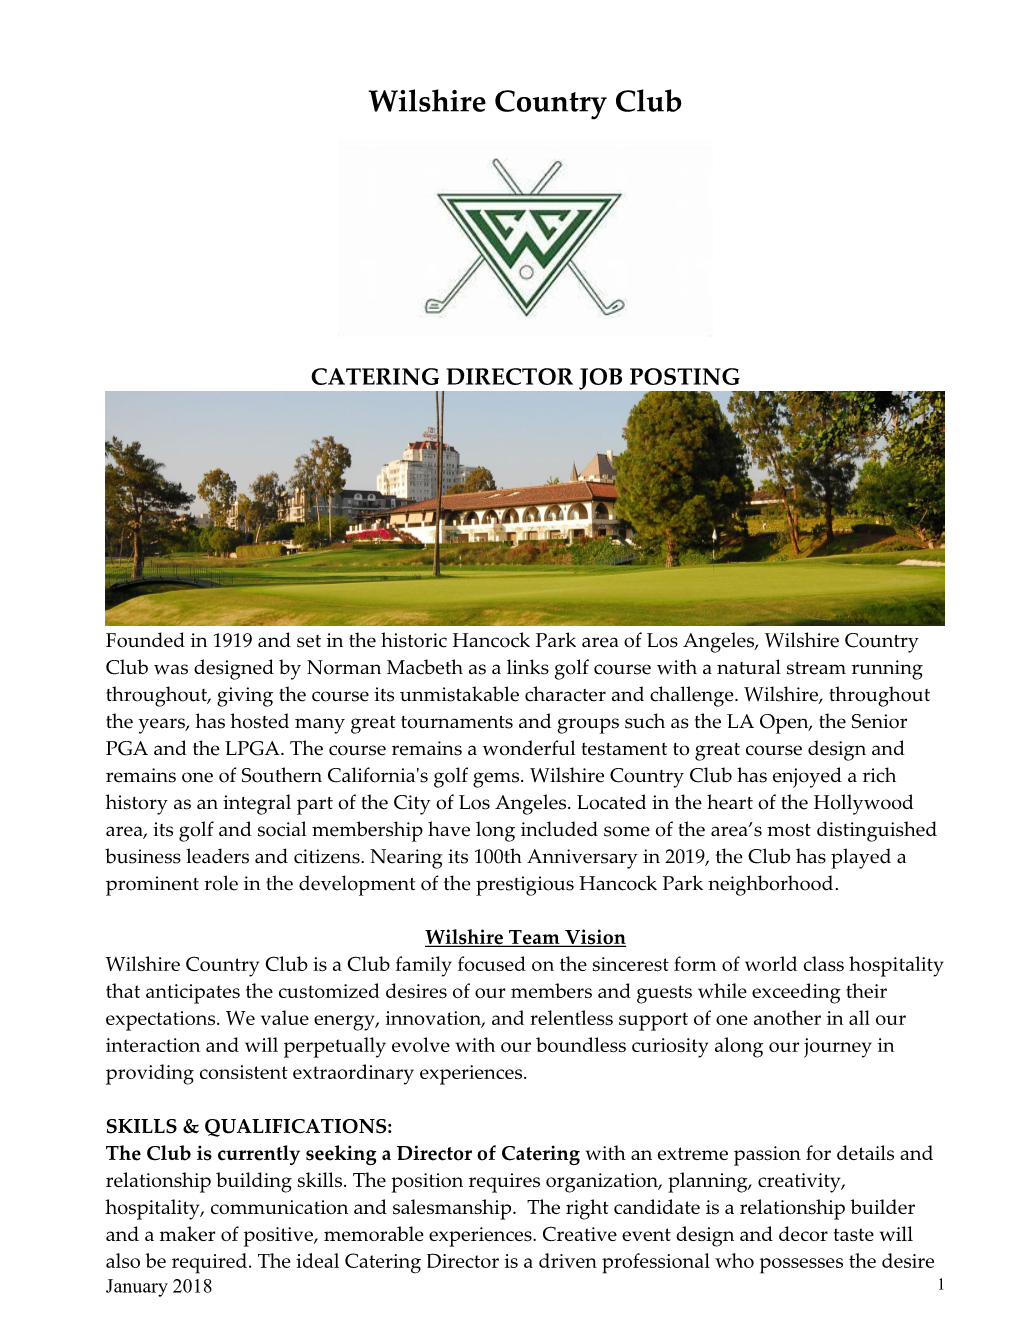 Catering Director, Wilshire Country Club, Los Angeles, CA